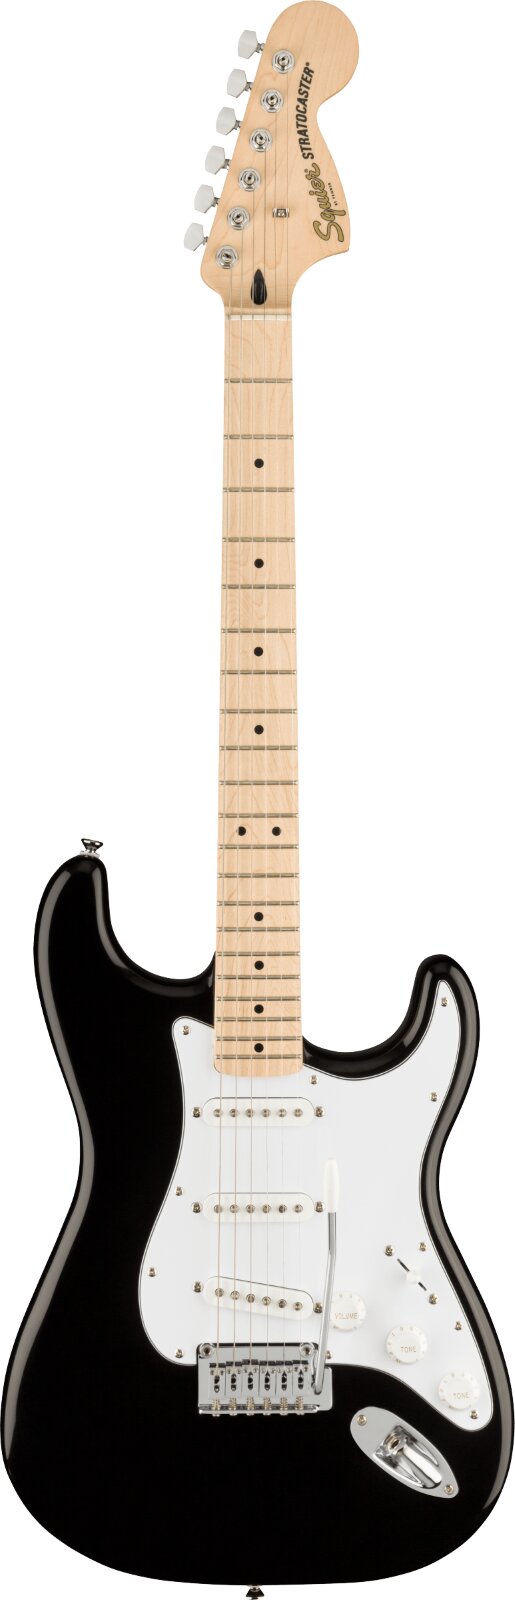 Squier Affinity Series Stratocaster, Maple Fingerboard, White Pickguard, Black : photo 1